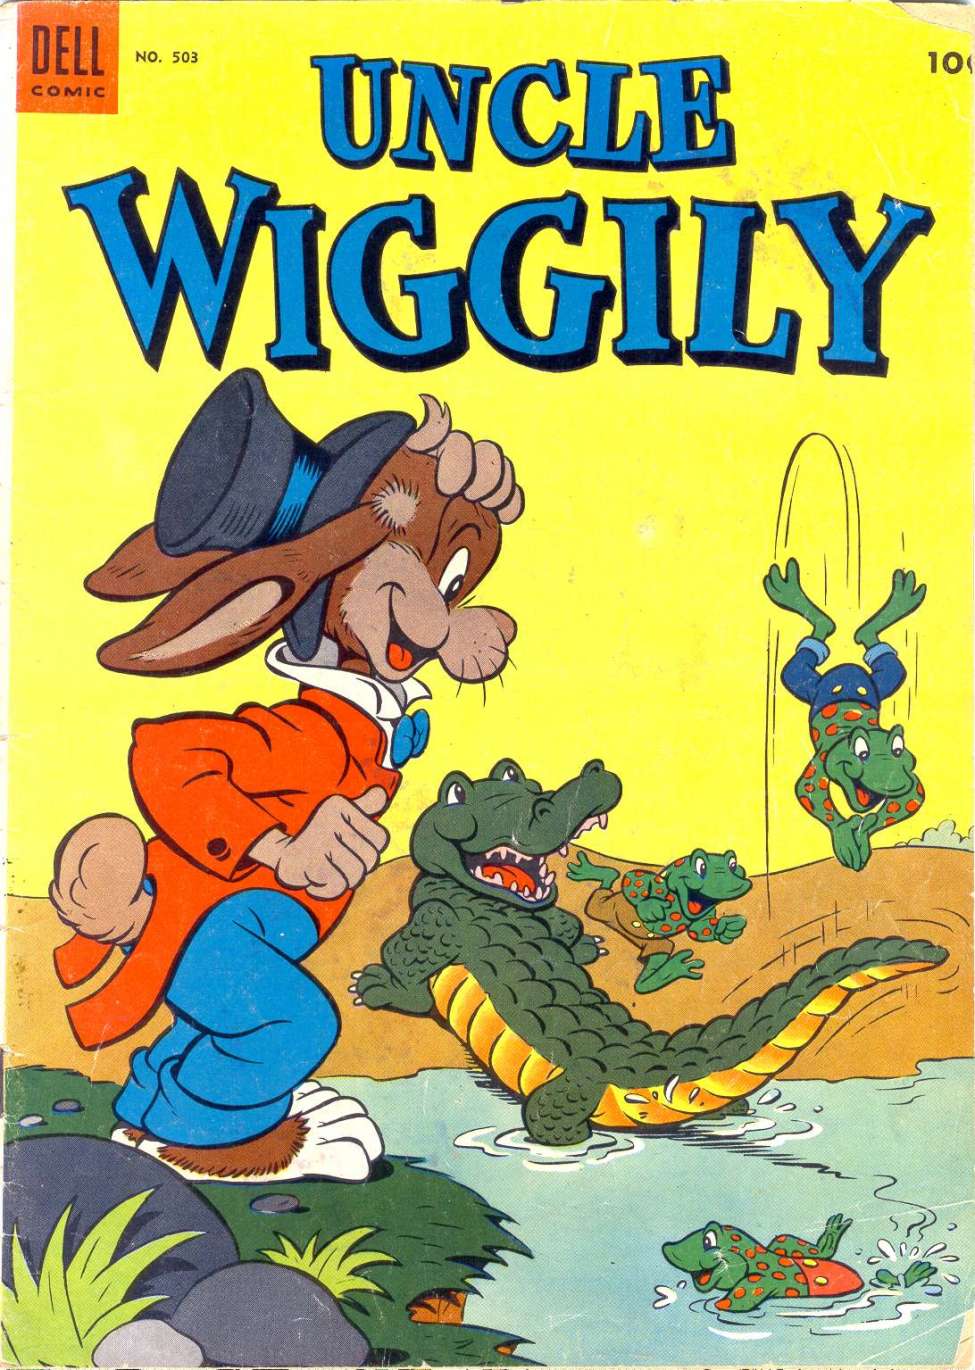 Book Cover For 0503 - Uncle Wiggily